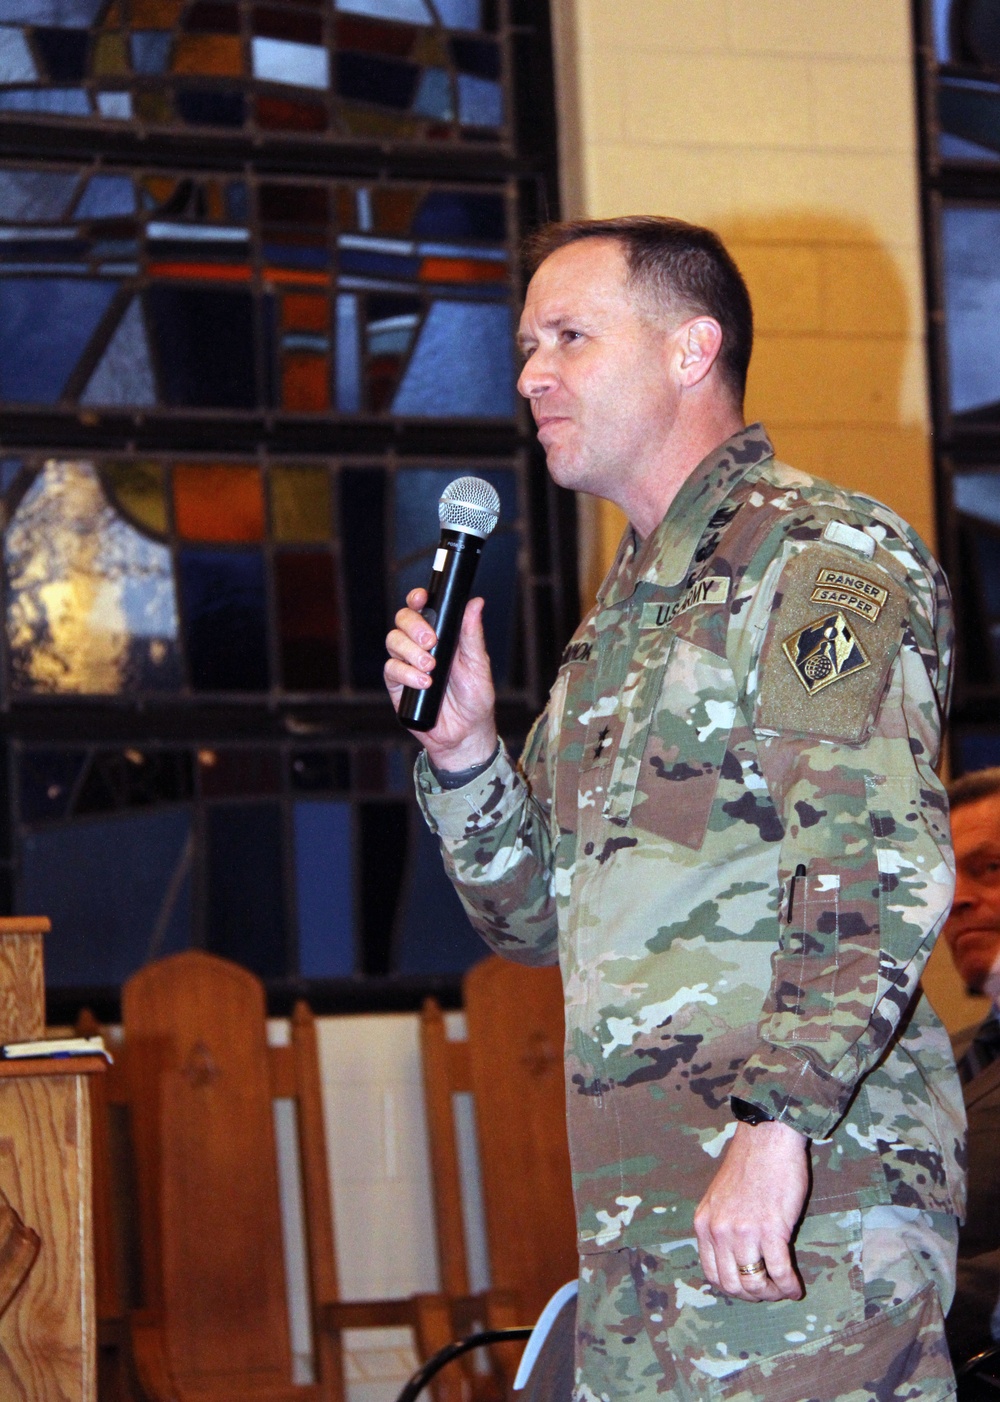 Fort Hamilton leaders, staff conduct town hall with base residents